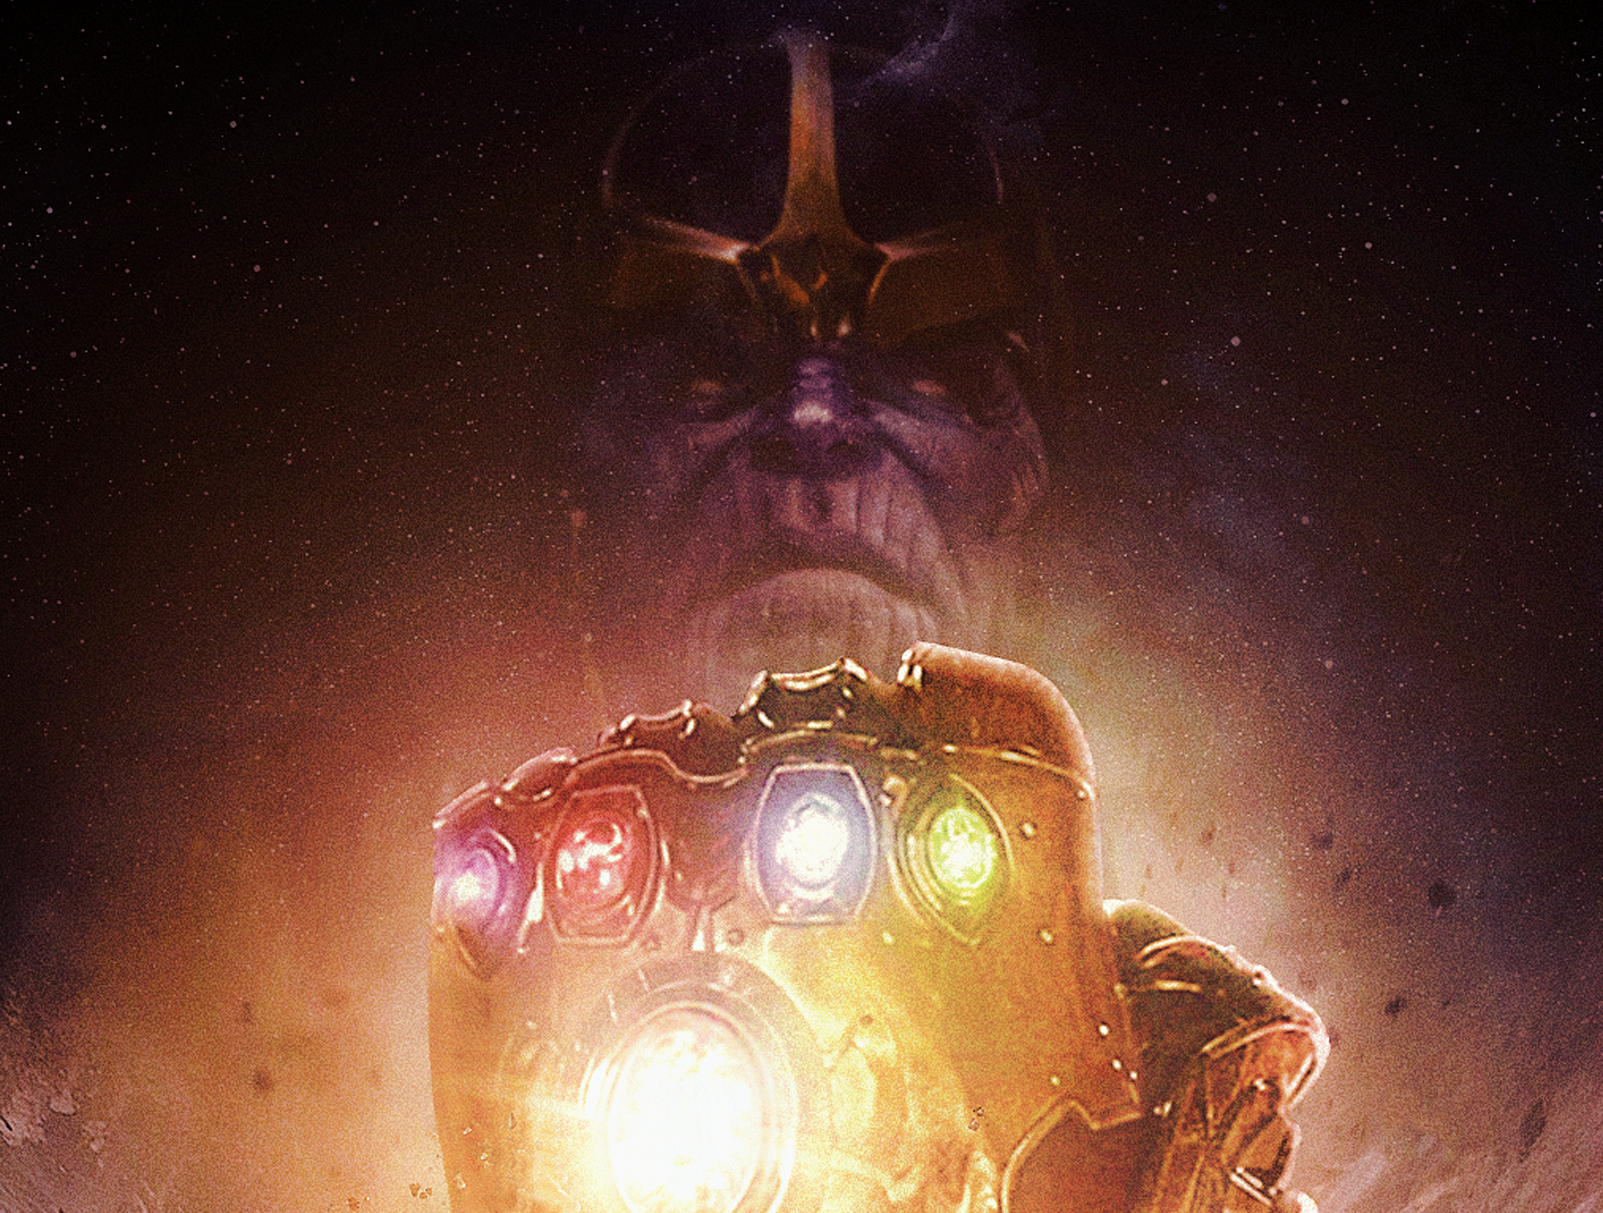 Avengers Infinity War Stunning HD Wallpapers [160 Img - Up to 12000px]